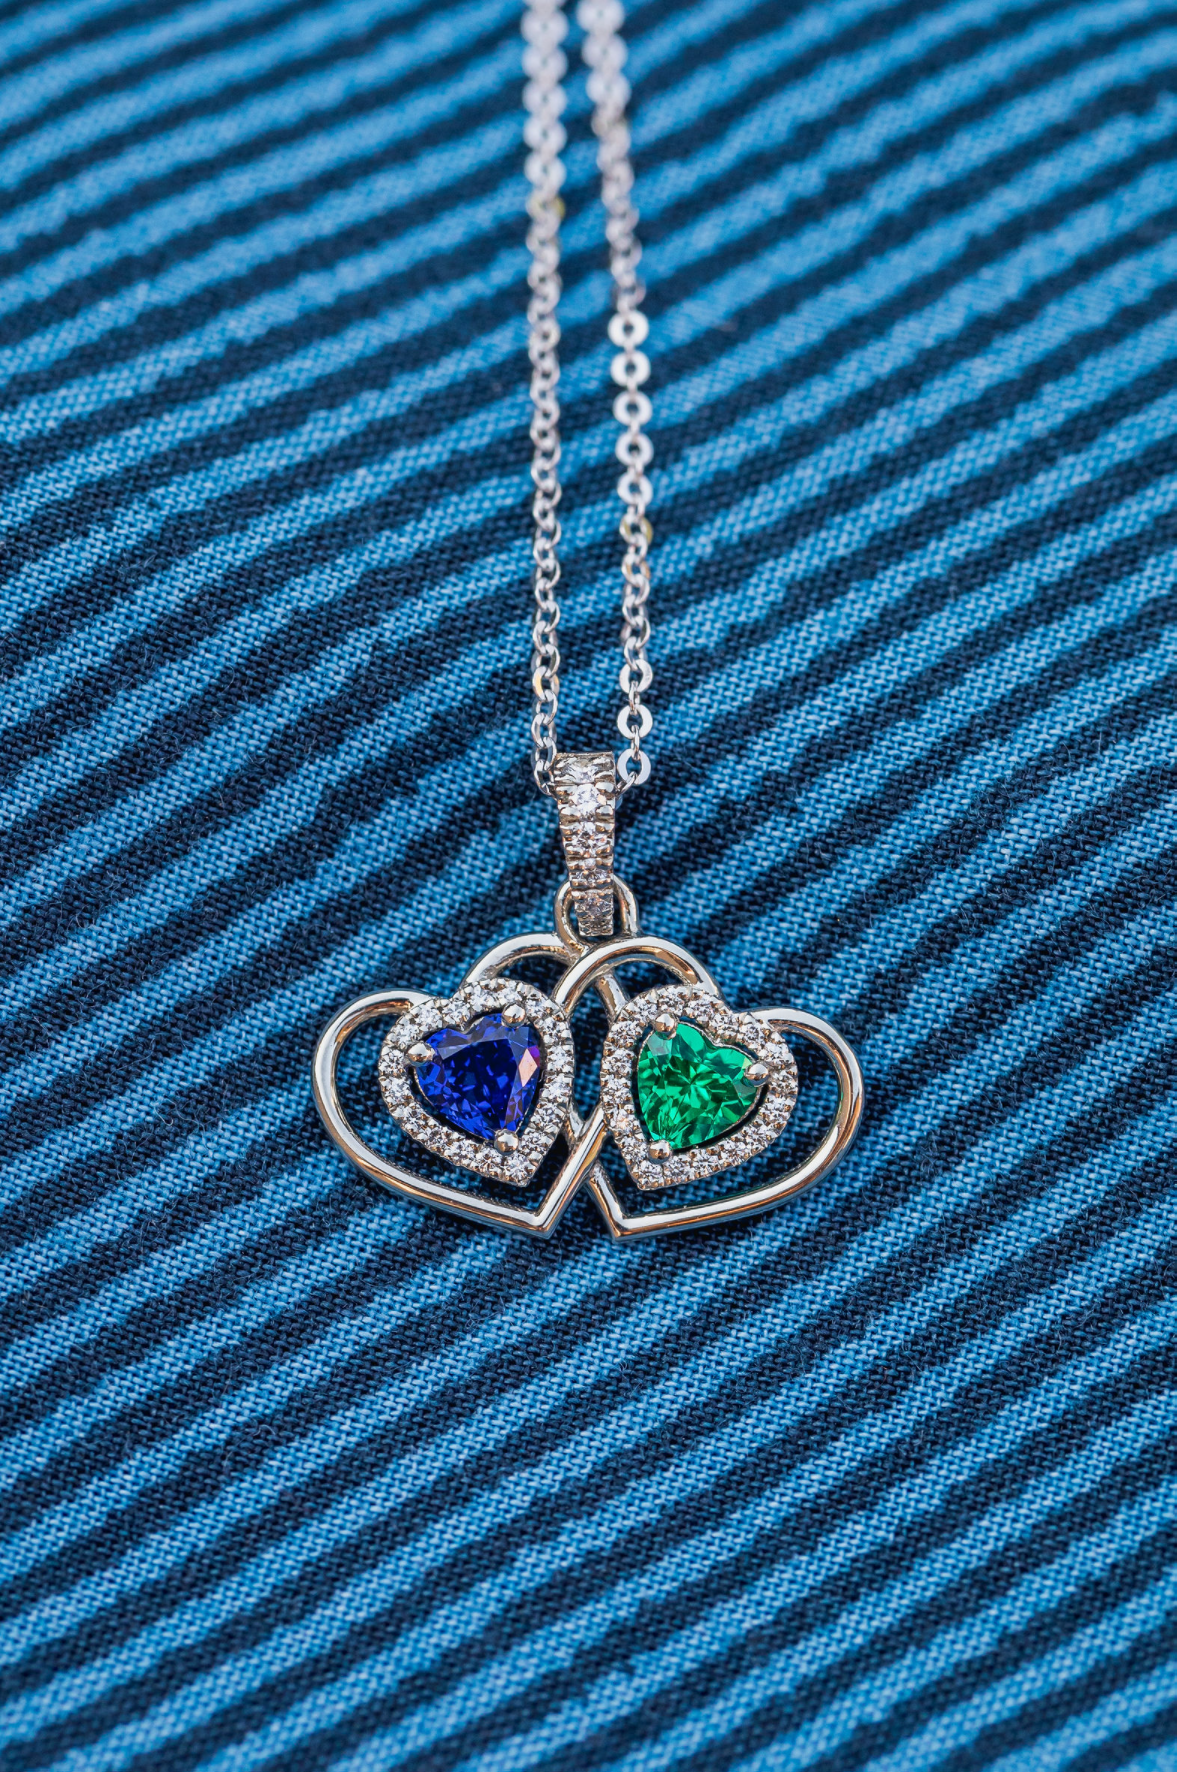 a pendant make with emerald and sapphire hearts in diamond halos